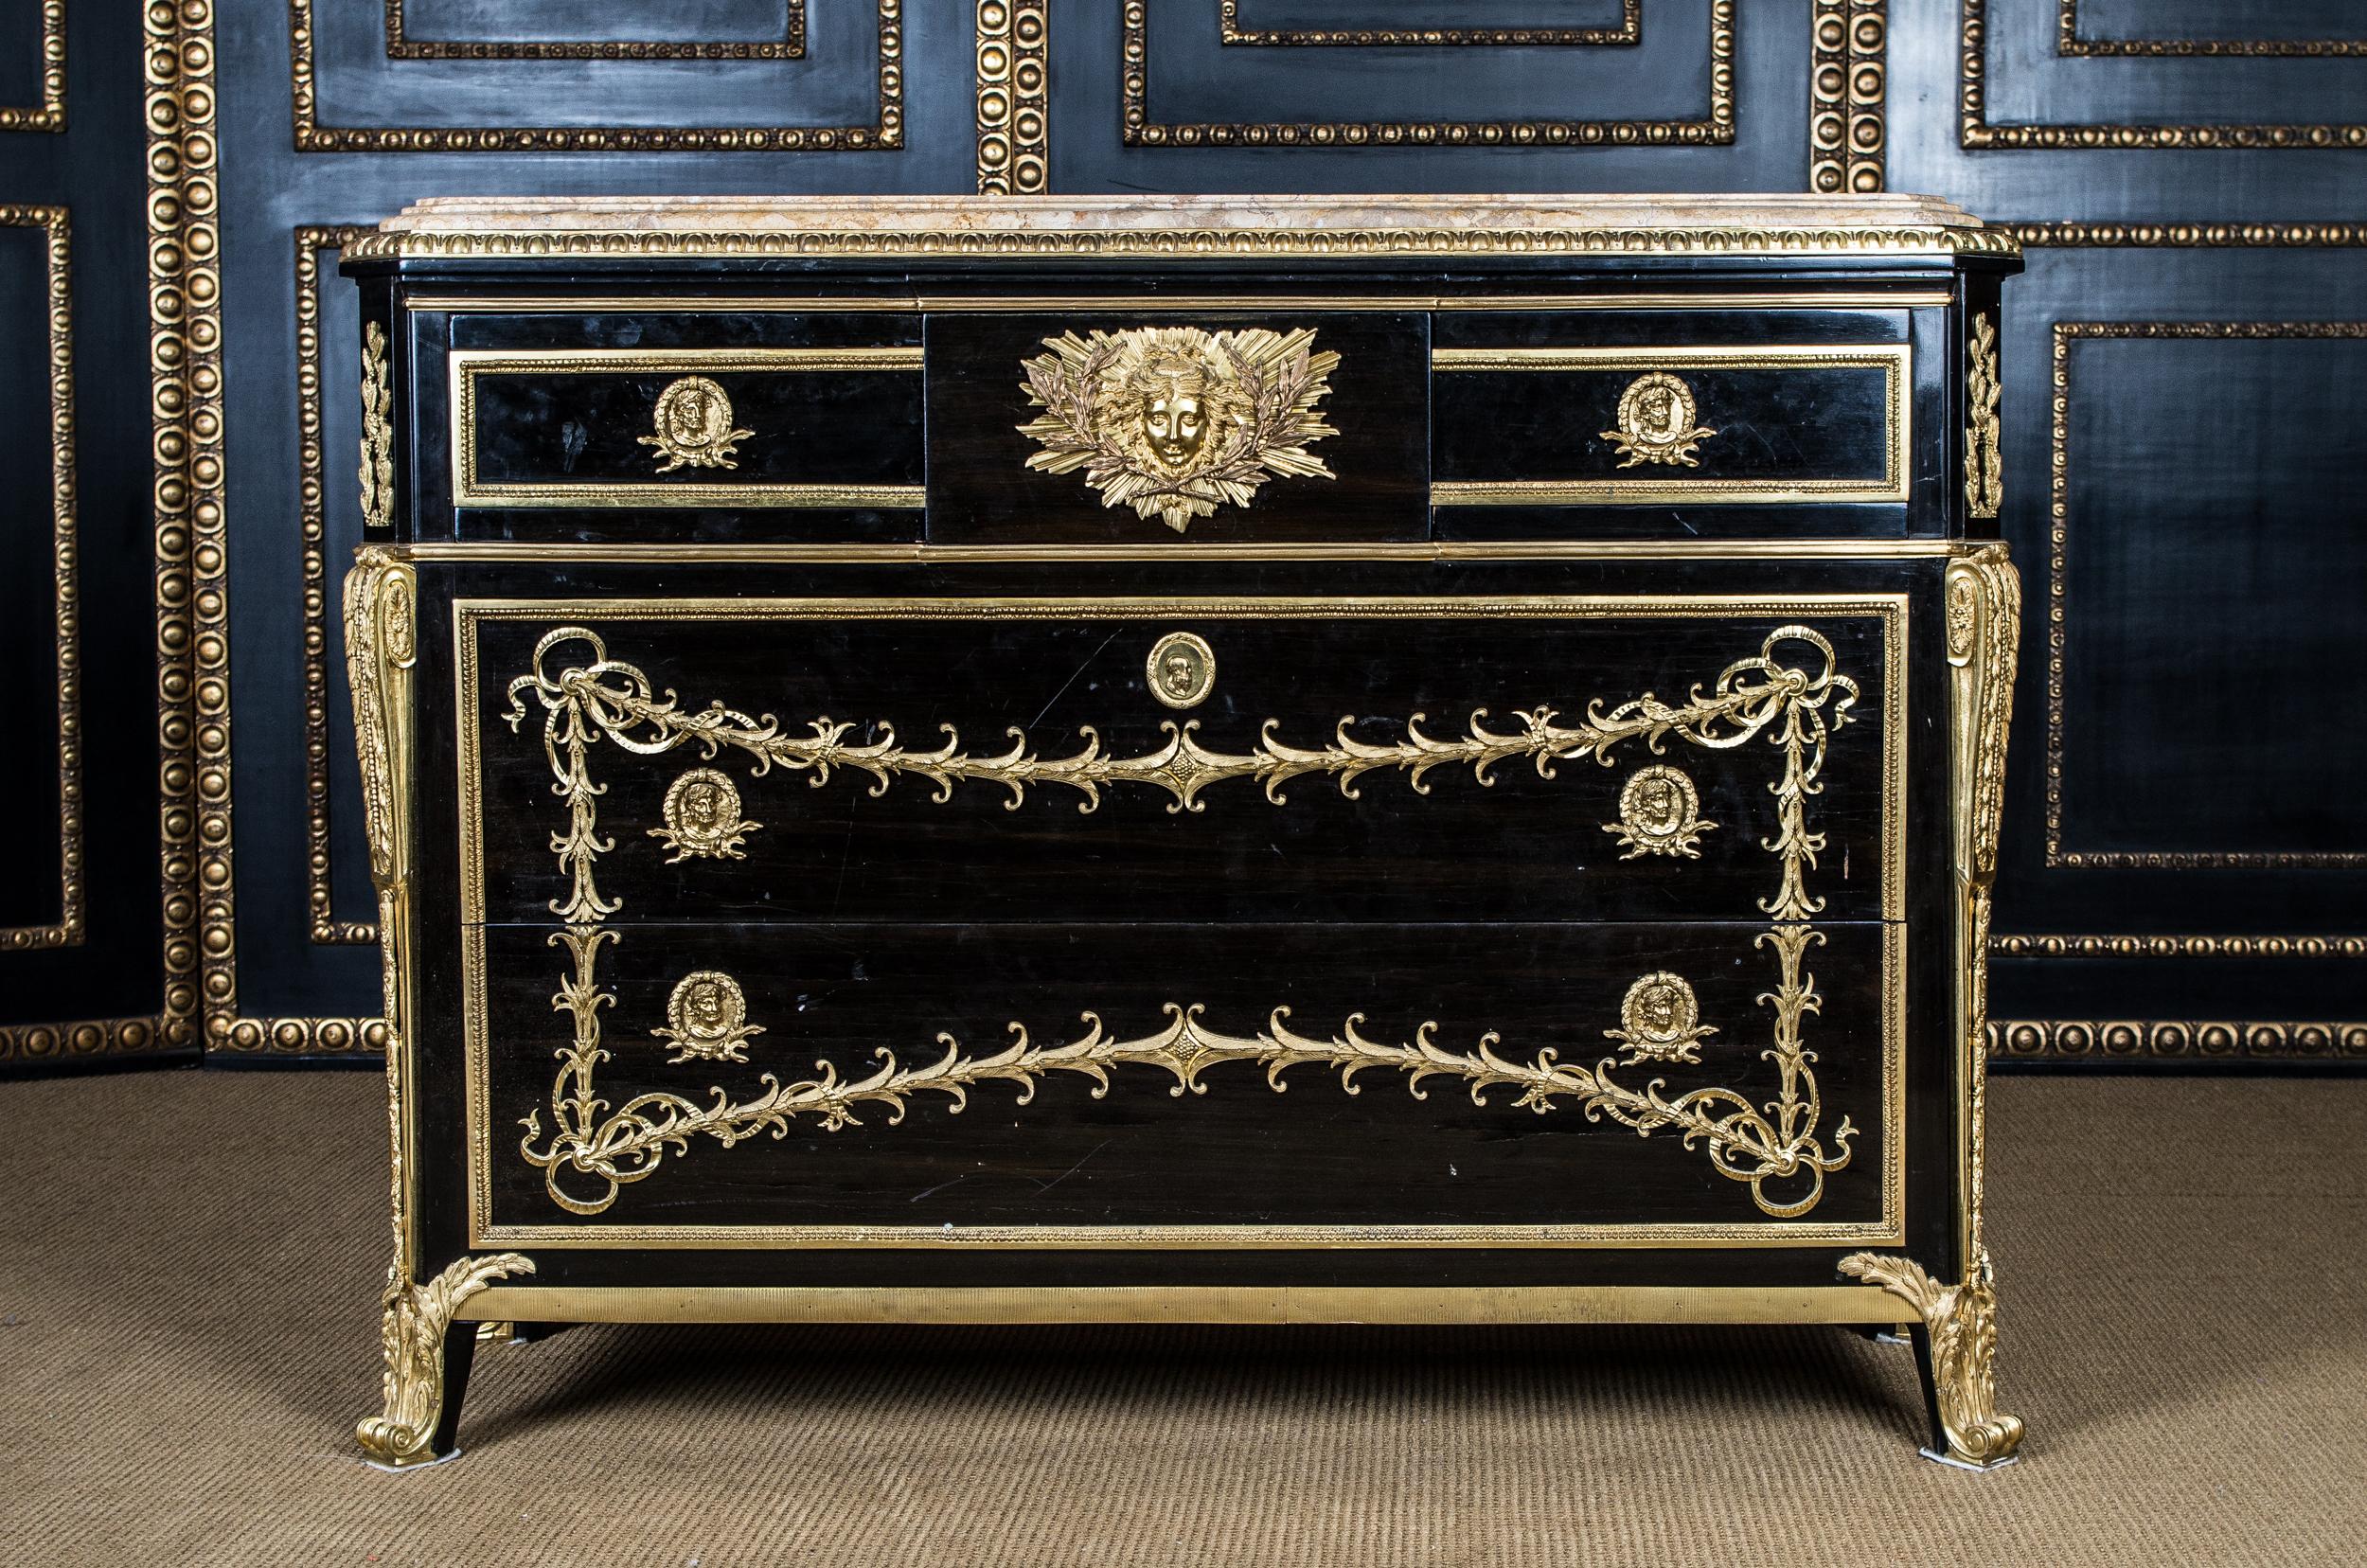 Commode after the original model from Jean Henri Riesener in transition style. Lightly modified model after an original by Jean Henri Riesener (1734-1806). Black ebonized rectangular corpus on bronze caps ending feet. The middle drawer is engraved